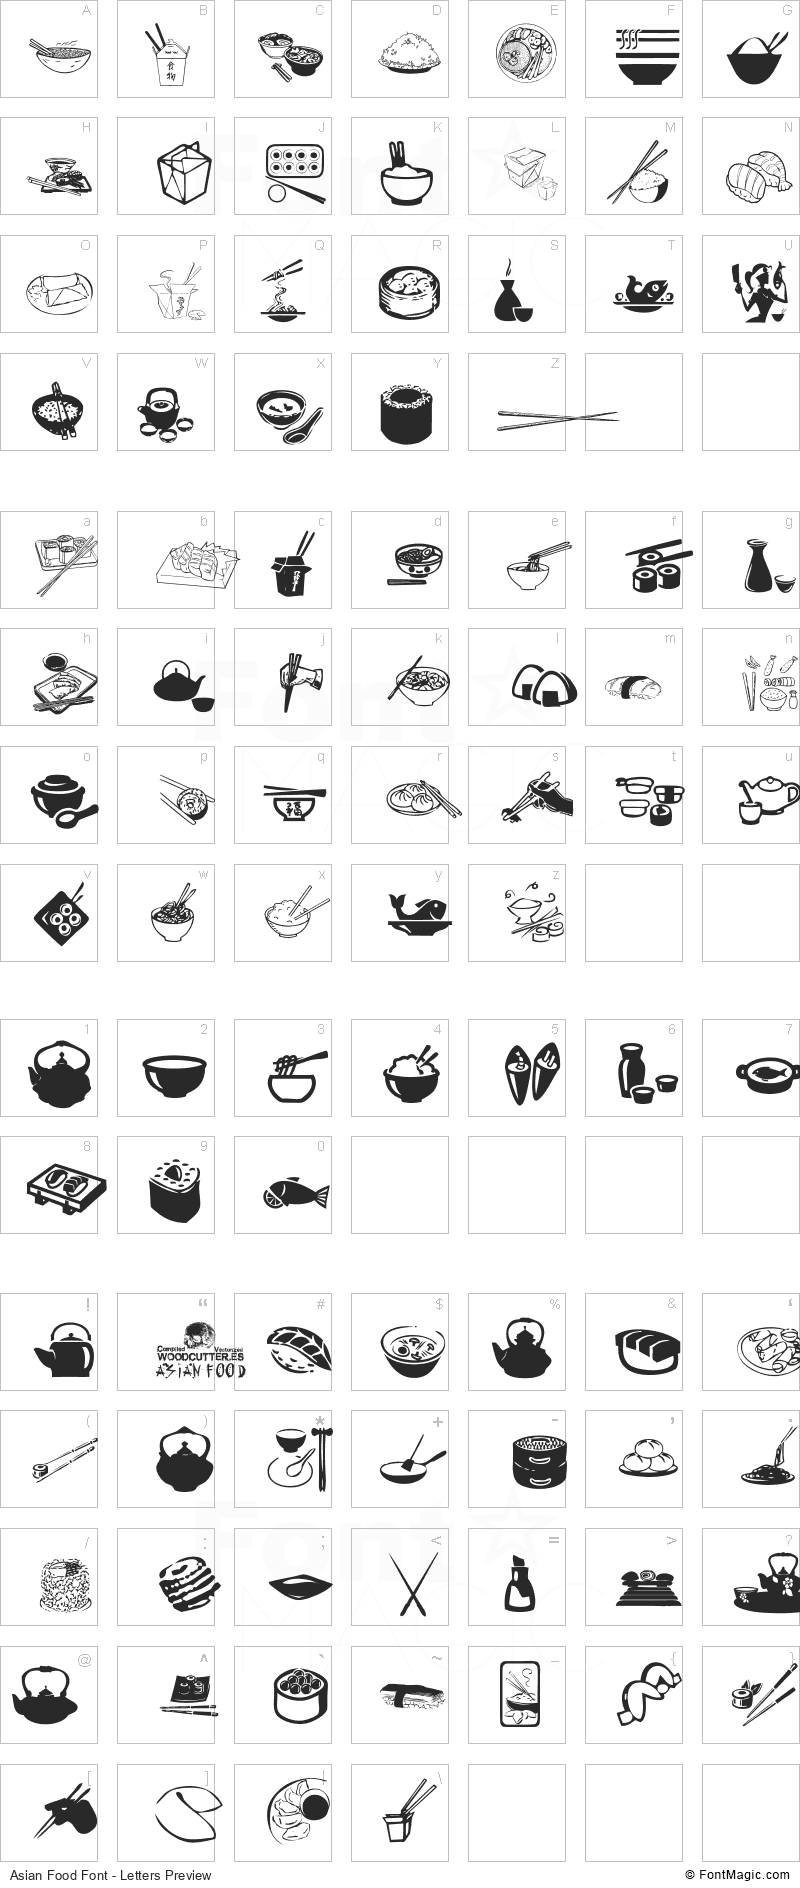 Asian Food Font - All Latters Preview Chart